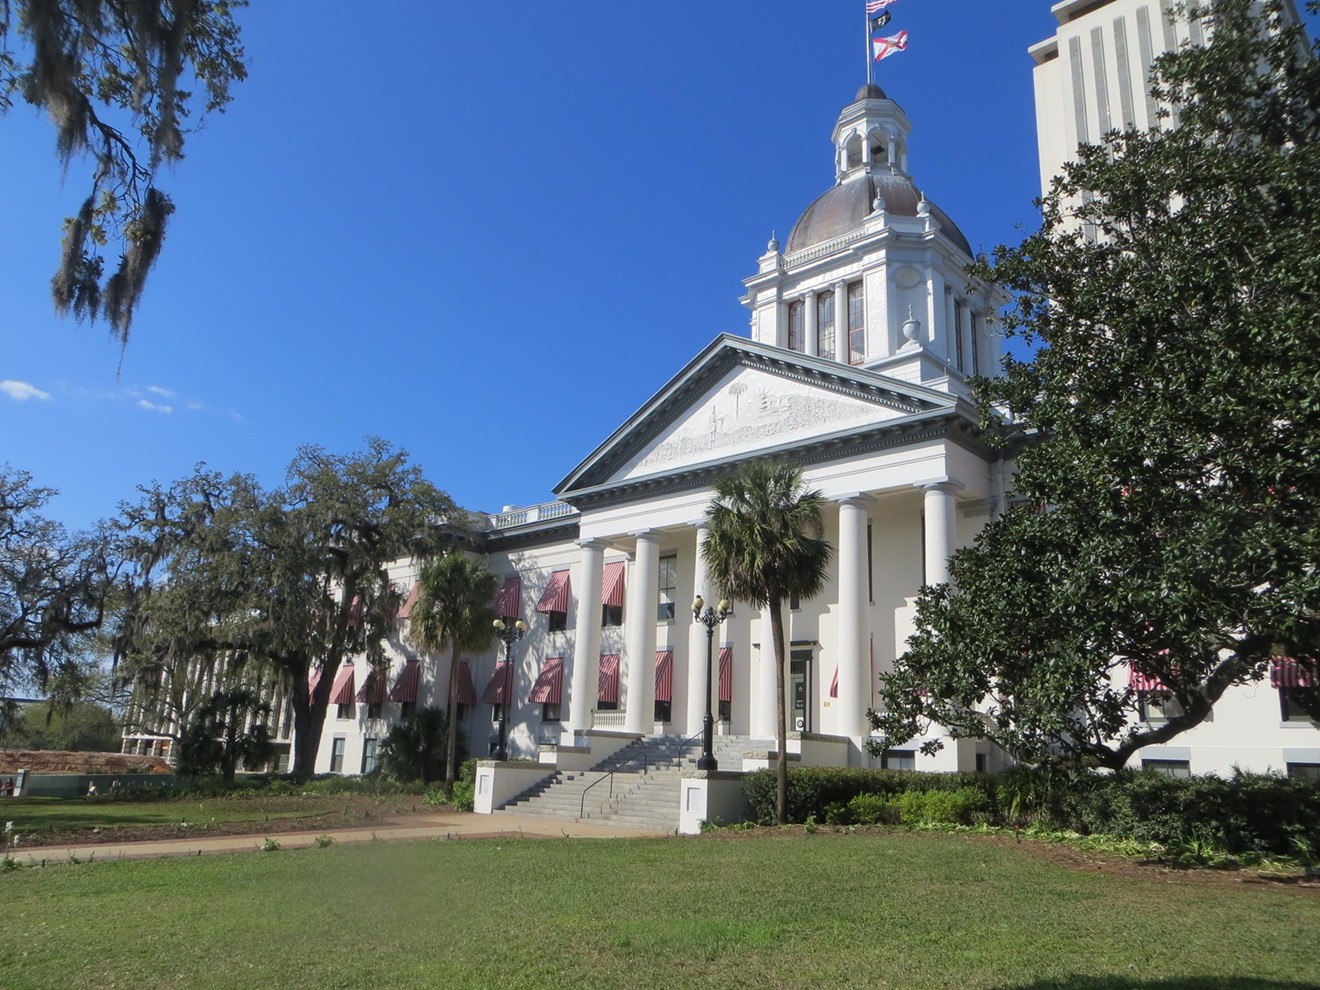 Florida's ethics agency is a national front-runner when it comes to transparency, but anti-corruption laws in the state could use some tightening.